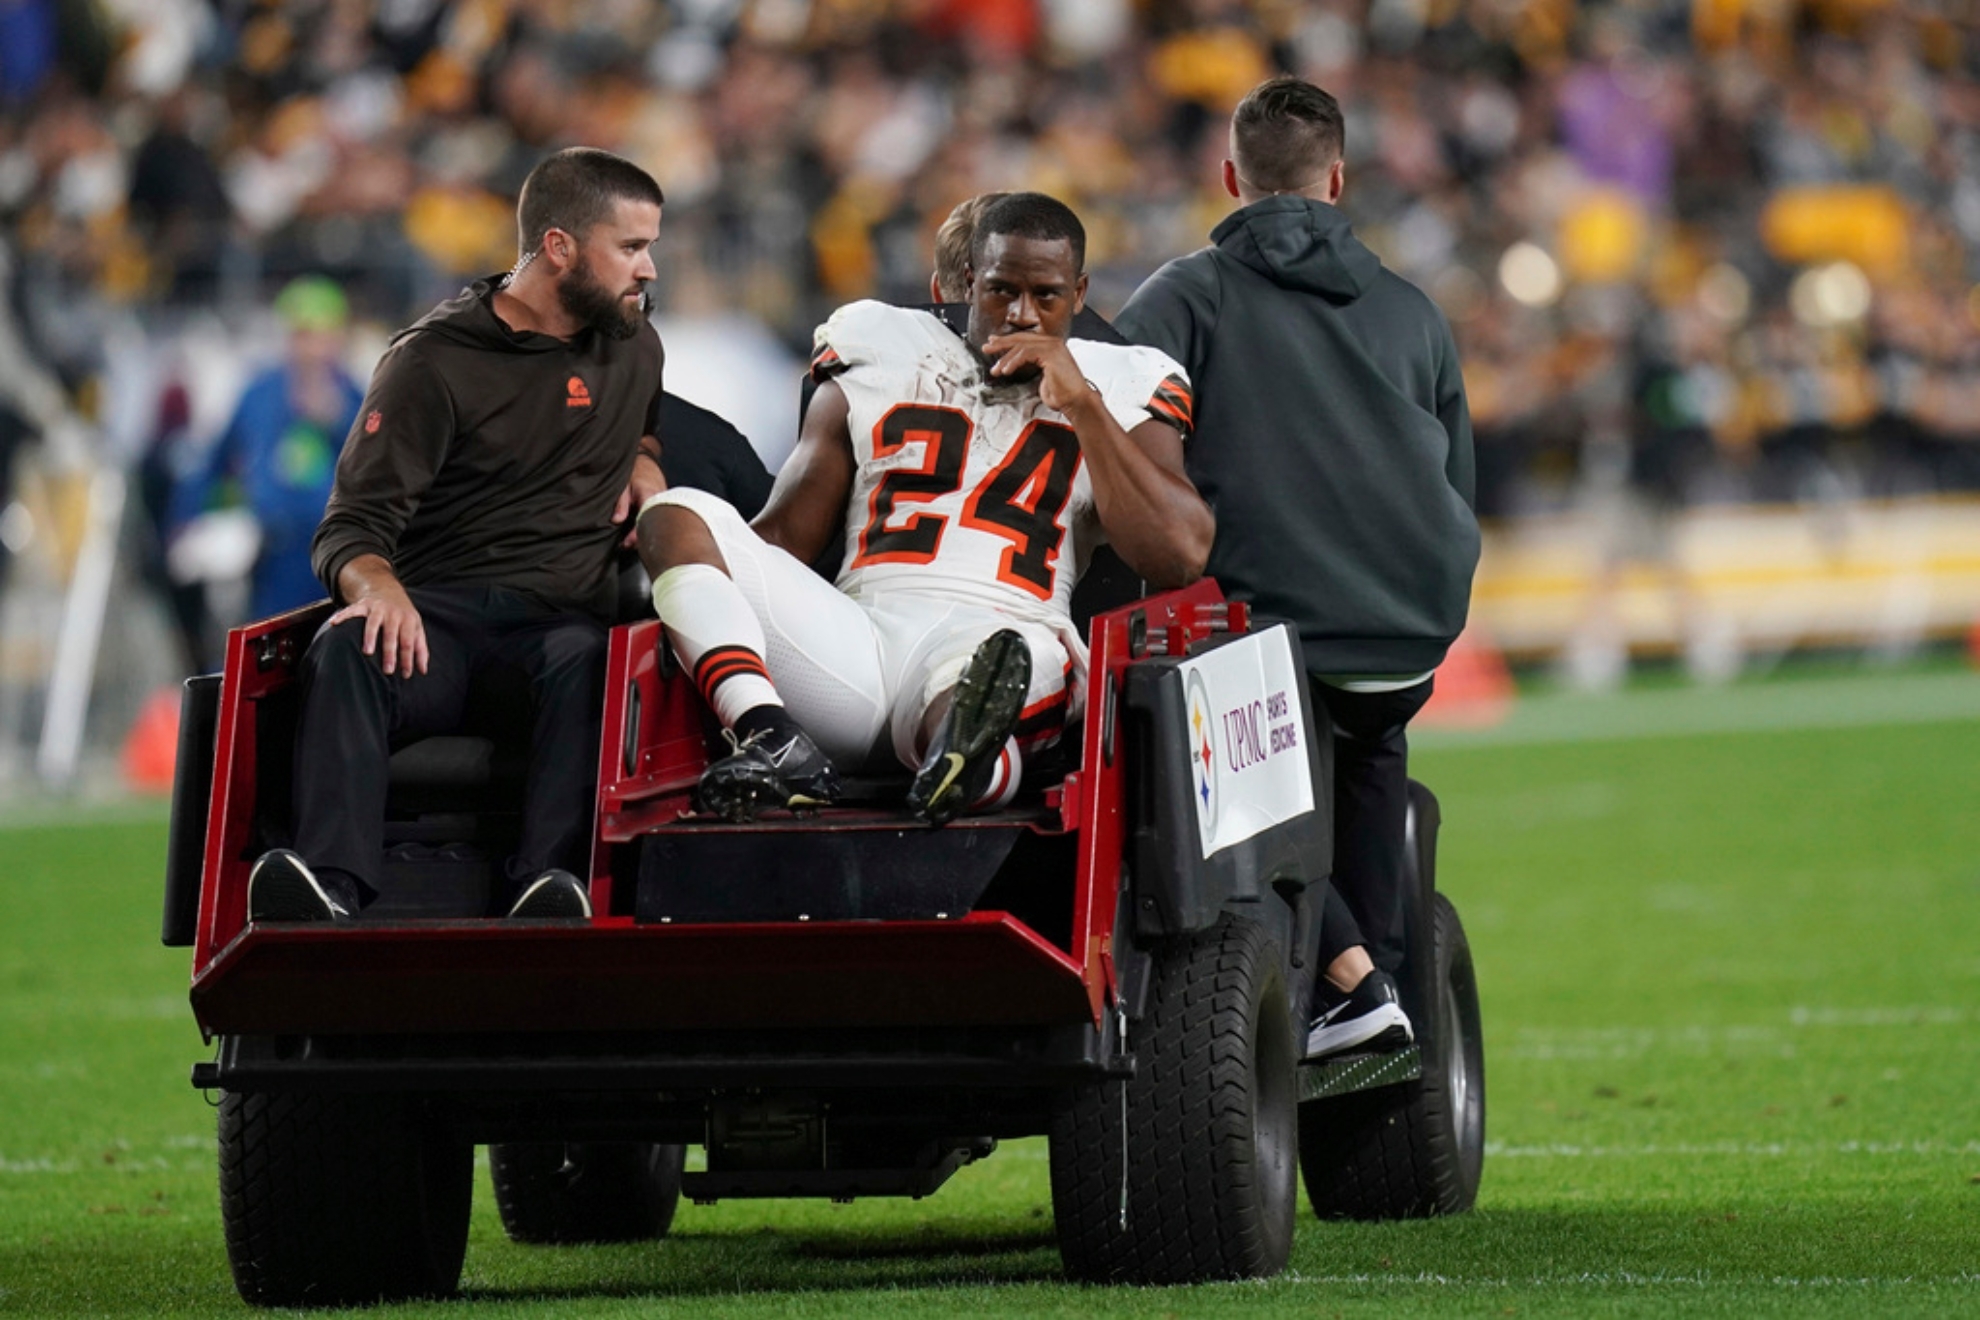 Chubb was the latest victim in a string of major injuries in the NFL